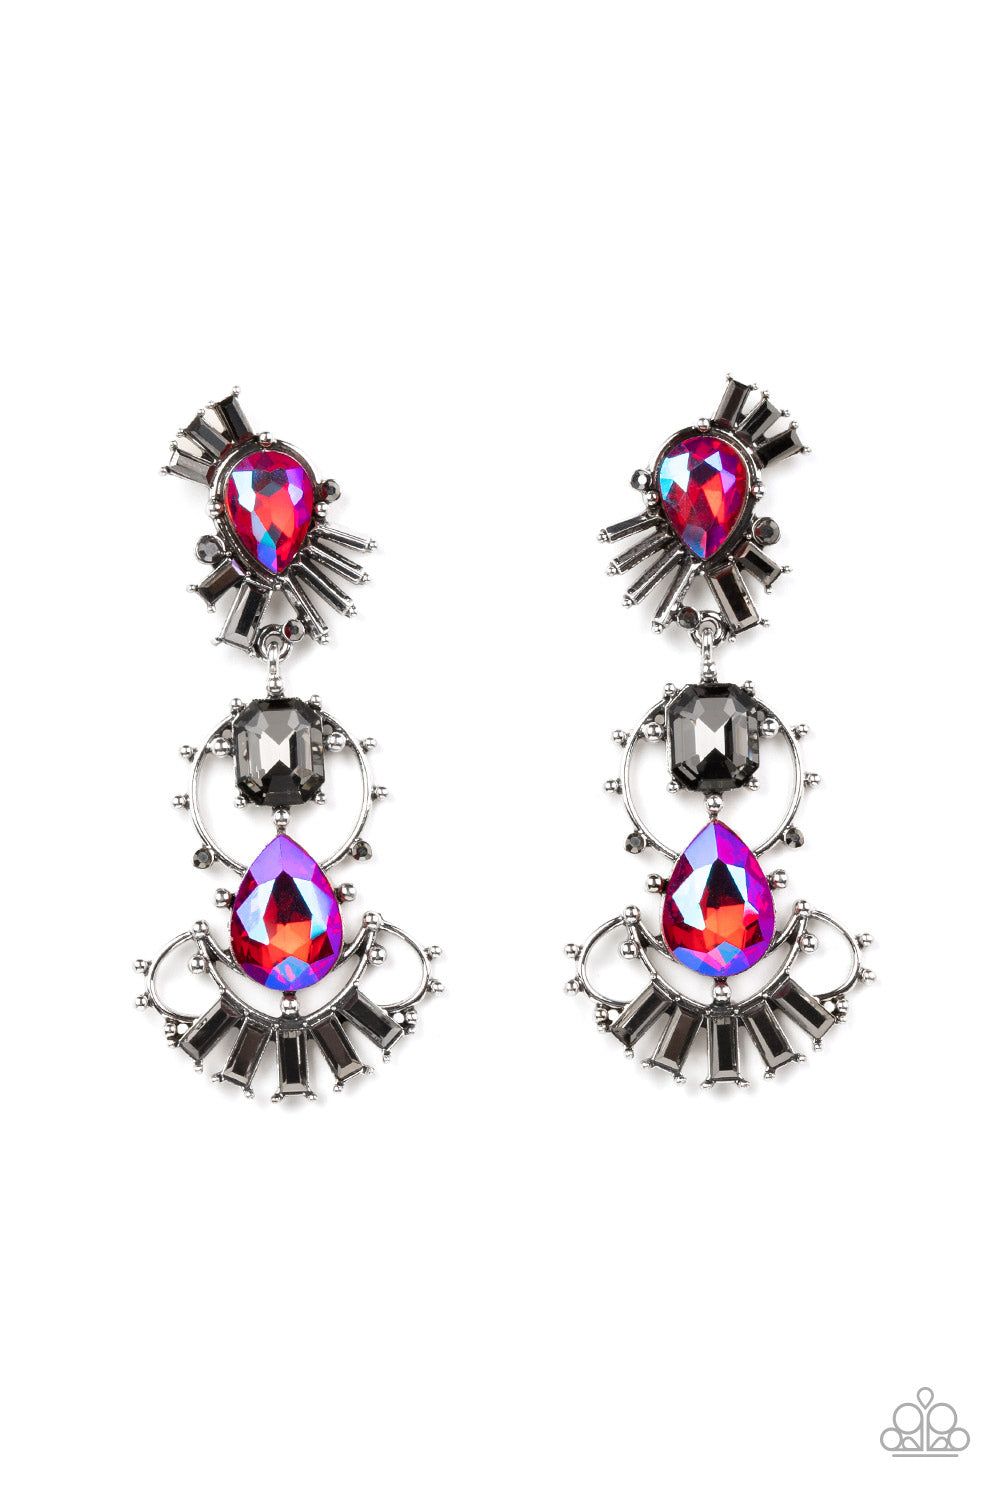 A cosmic collision of iridescent pink teardrop gems and a solitaire smoky emerald cut rhinestone haphazardly adorns studded silver frames. Dotted in round and emerald cut hematite rhinestone accents, the abstract frames stack into a stellar lure. Earring attaches to a standard post fitting. Due to its prismatic palette, color may vary.  Sold as one pair of post earrings.